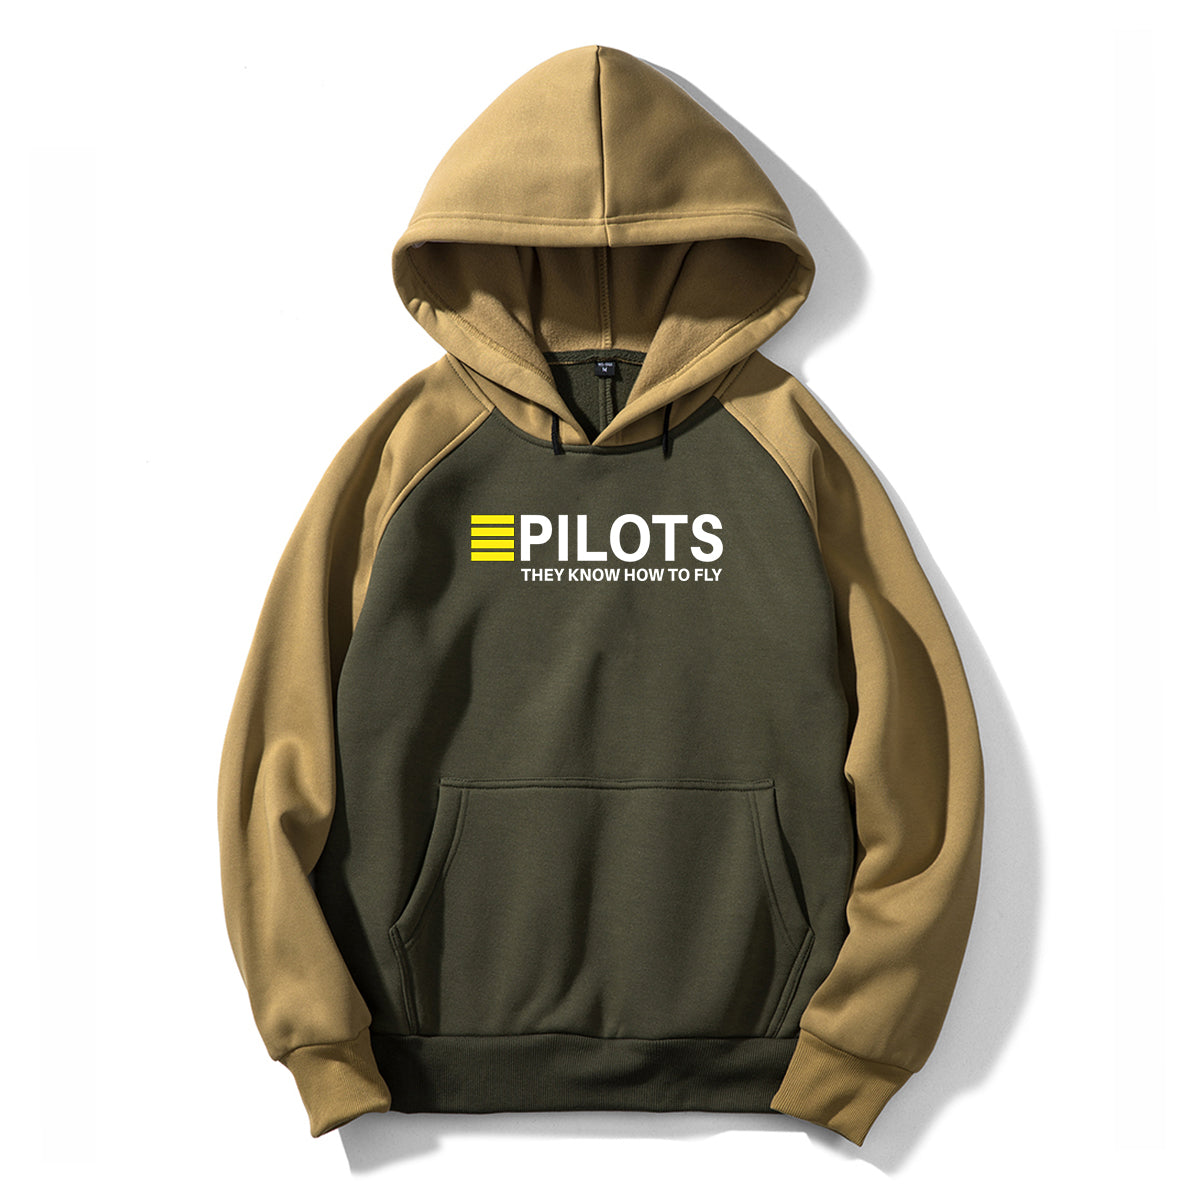 Pilots They Know How To Fly Designed Colourful Hoodies